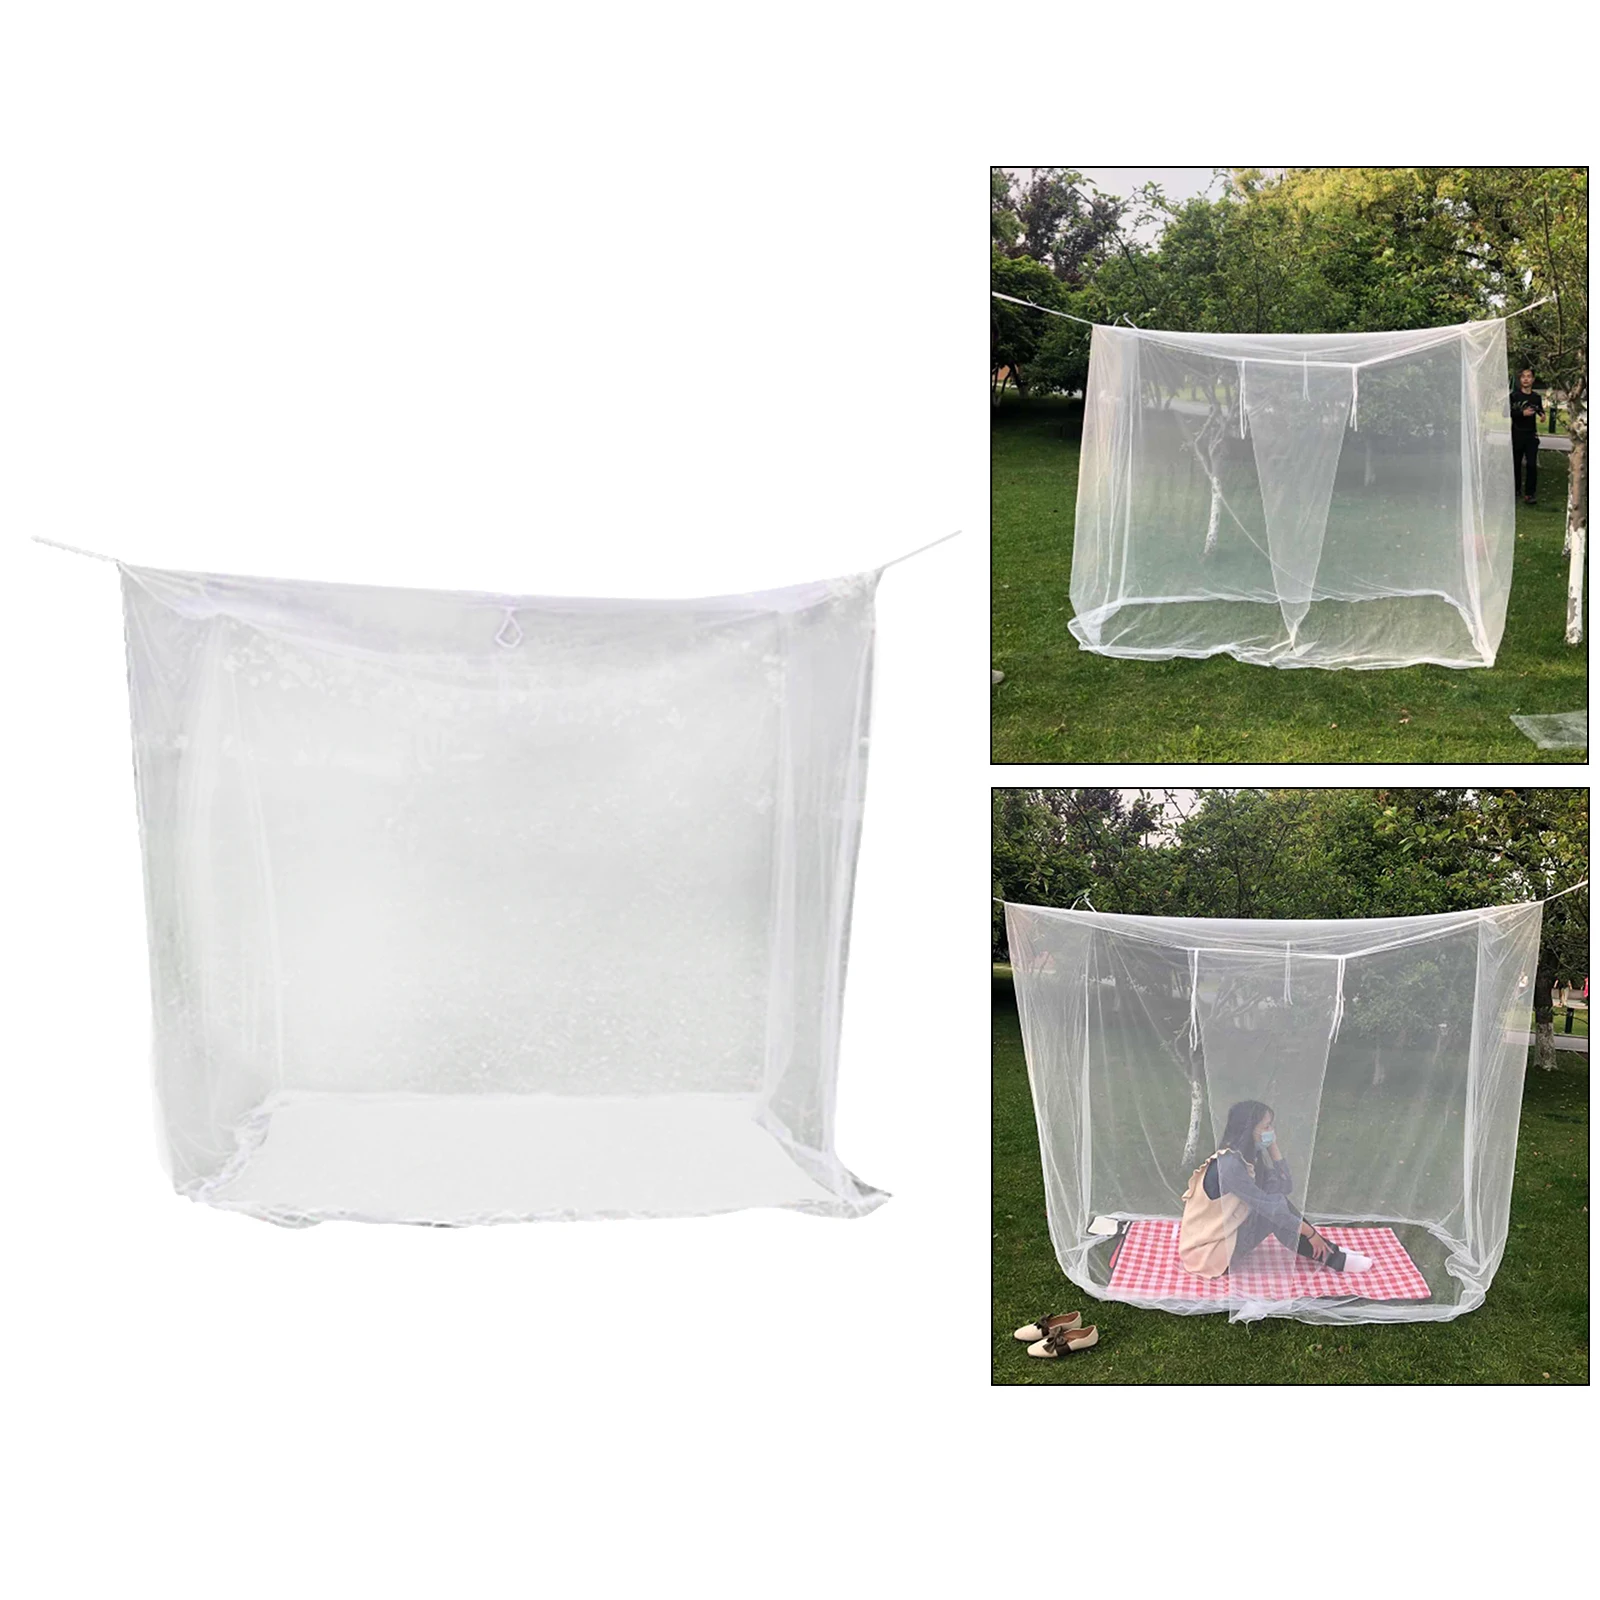  Net Fine Mesh Large Canopy Lightweight   for Travel Camping  Outdoor